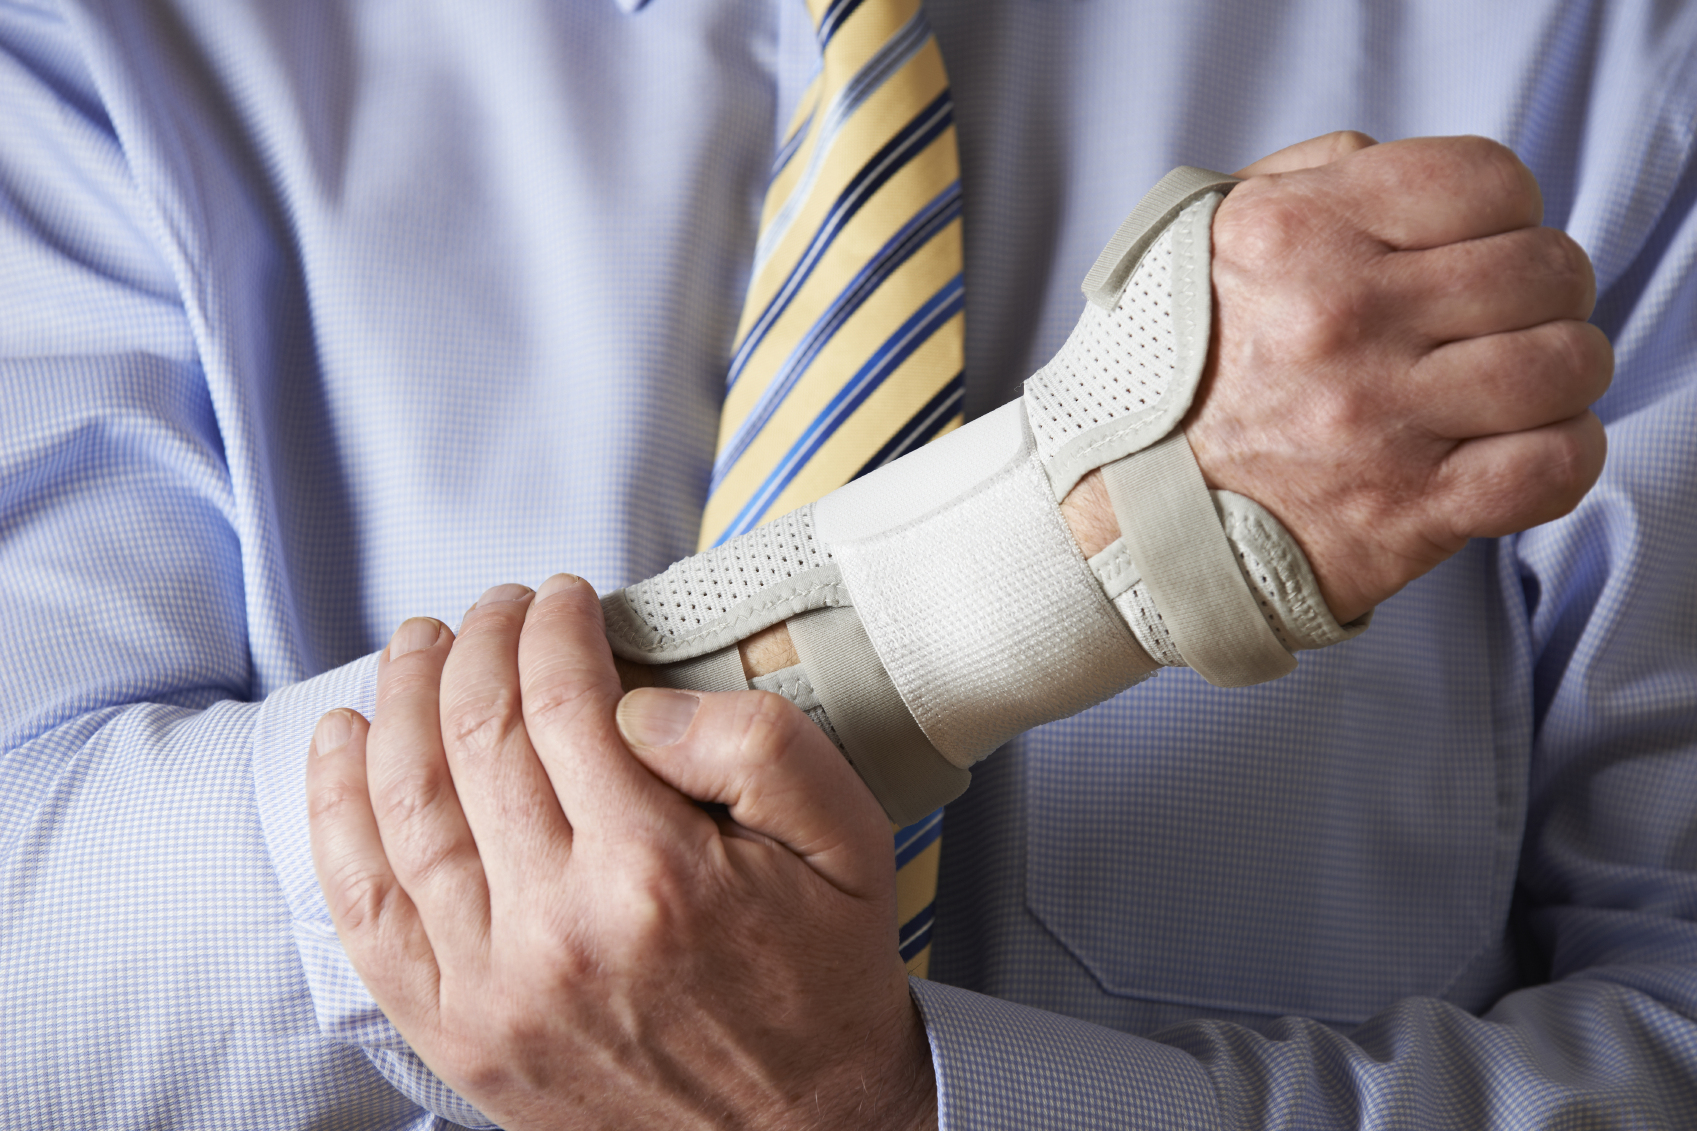 Why You Should Contact a Personal Injury Attorney